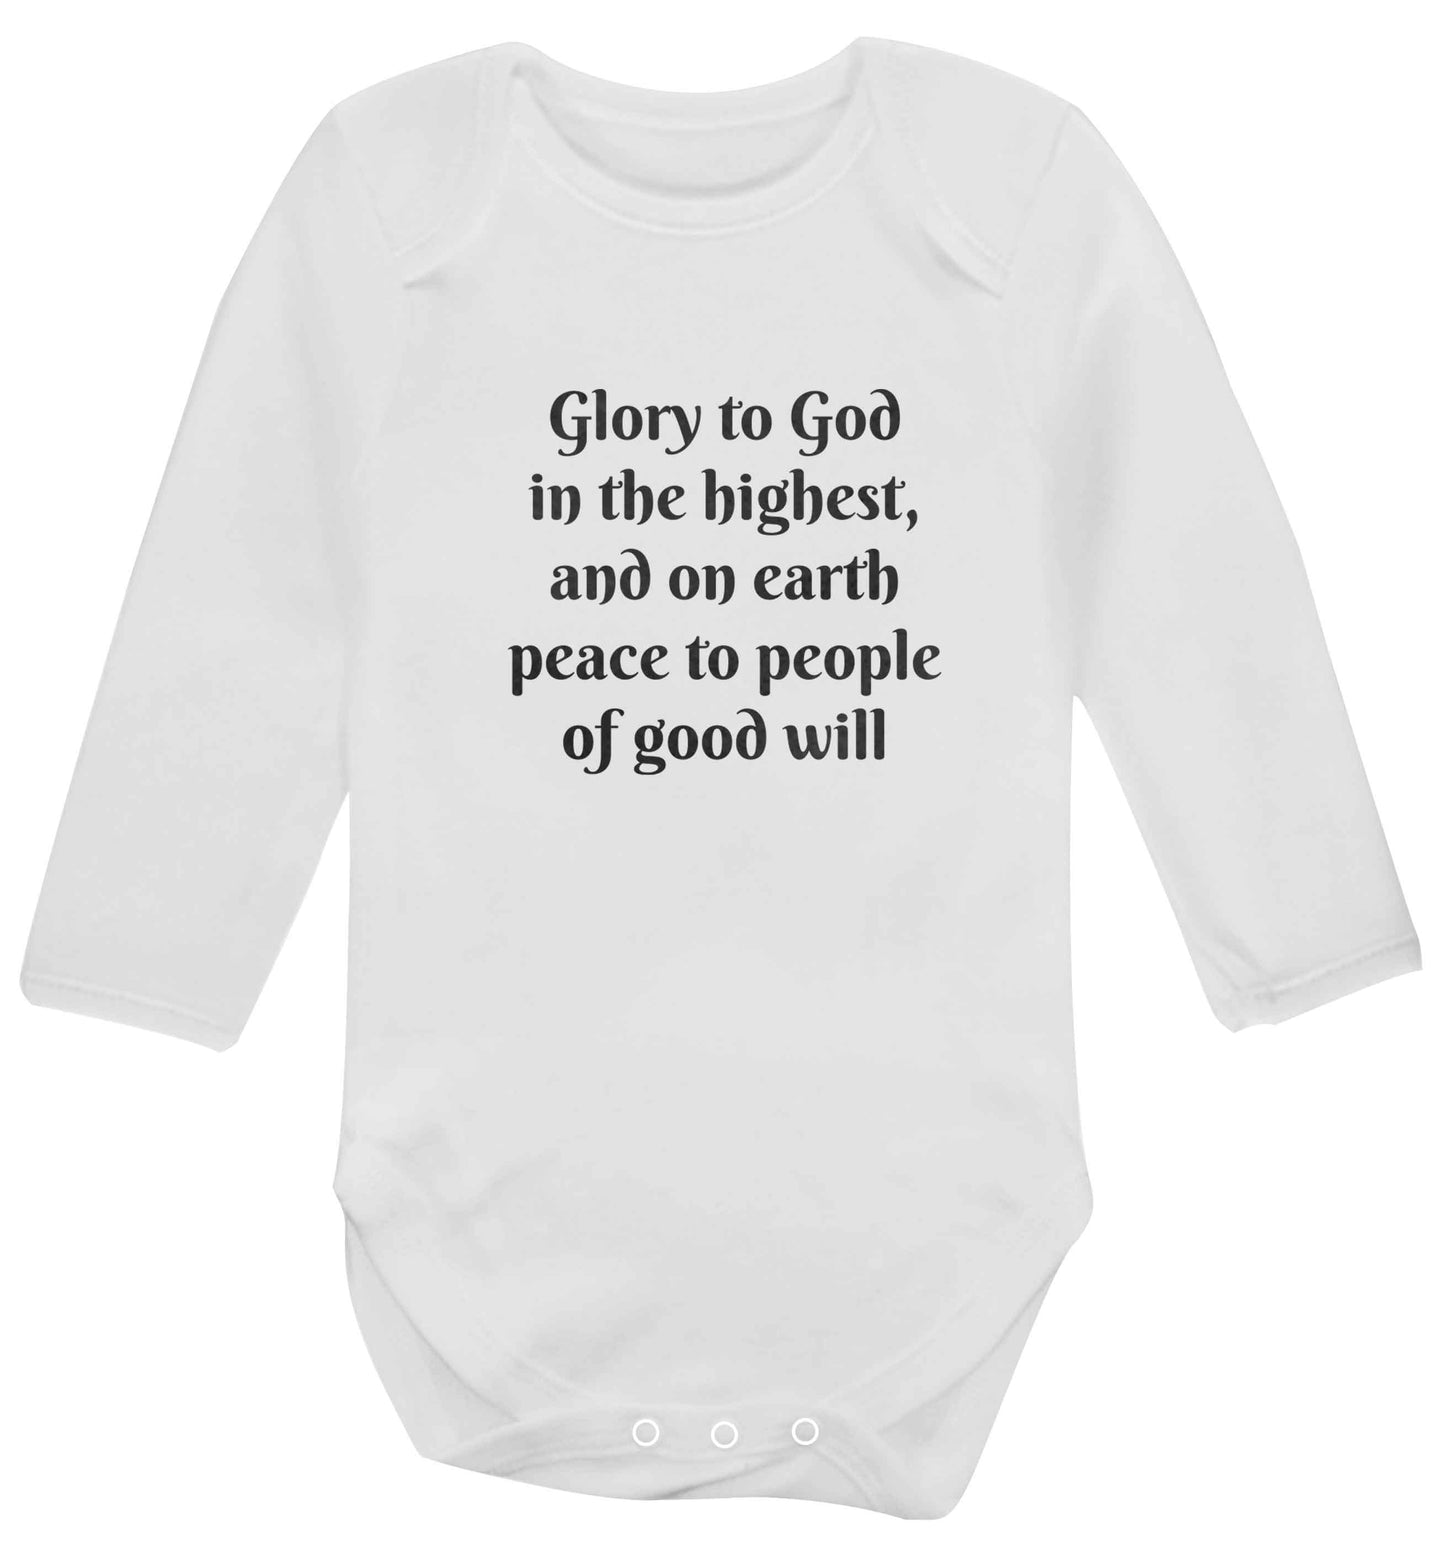 Glory to God in the highest, and on earth peace to people of good will baby vest long sleeved white 6-12 months